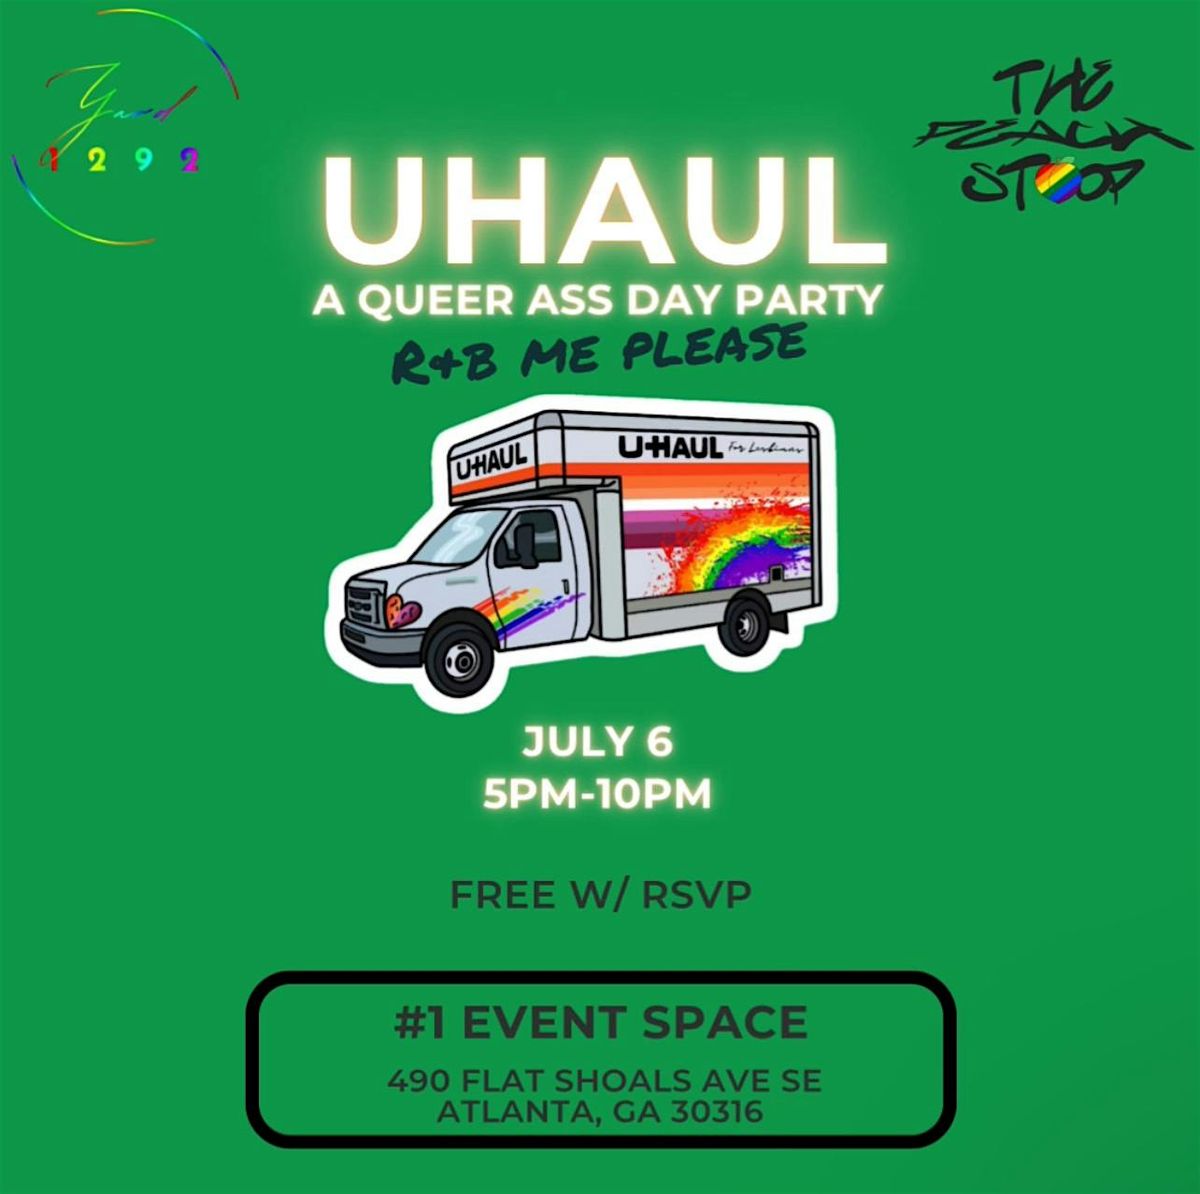 Yard 1292 - U-Haul Queer Ass Day Party  (R&B)